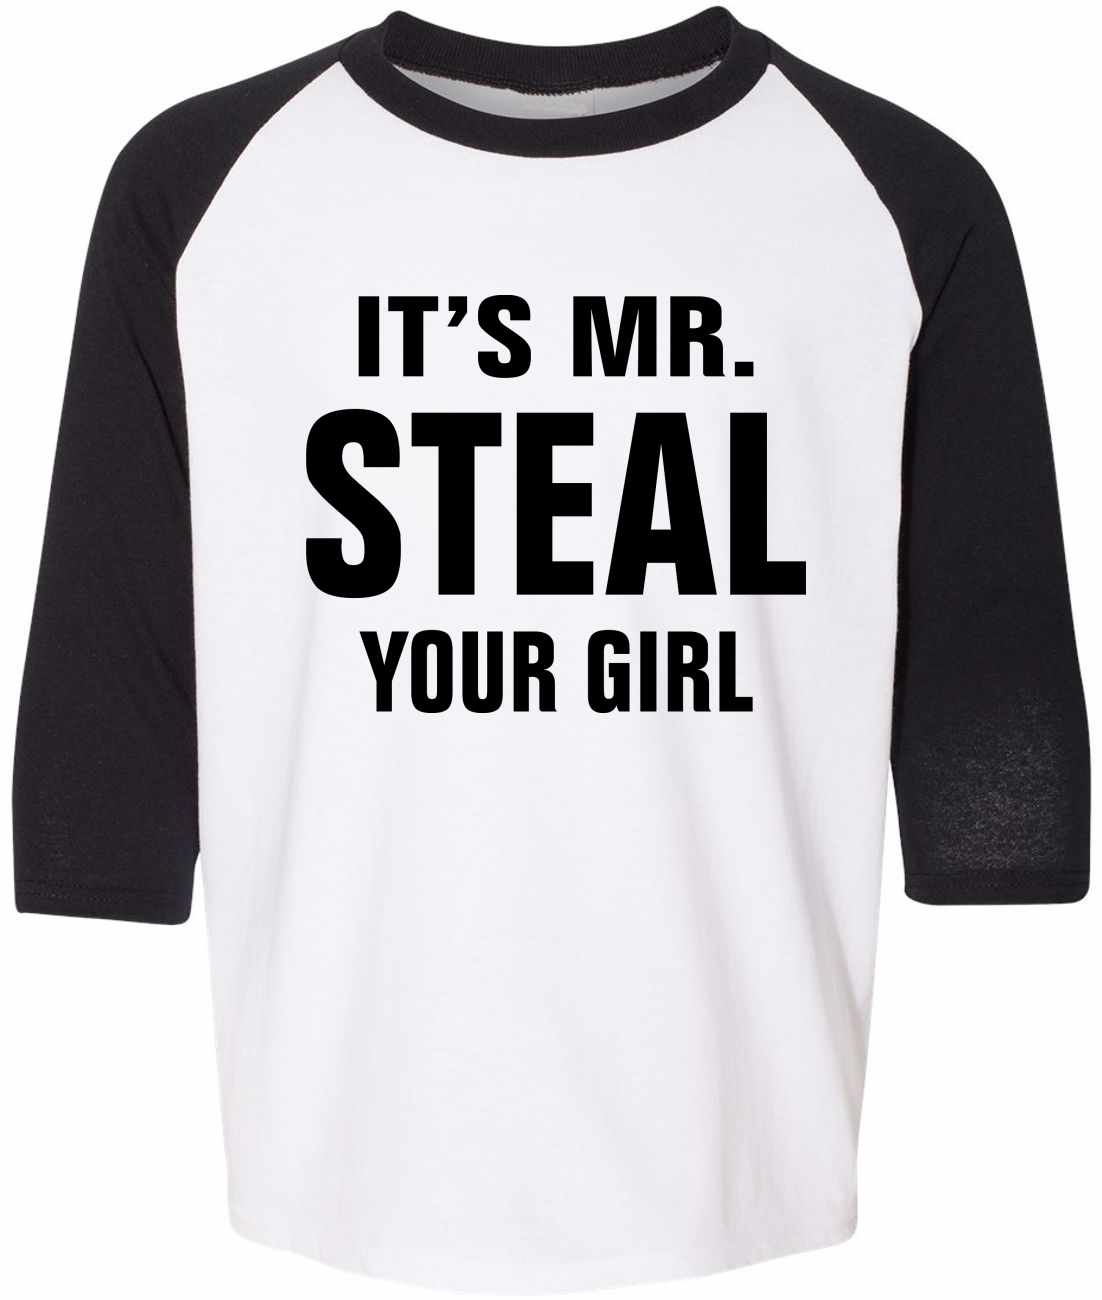 IT'S MR. STEAL YOUR GIRL on Youth Baseball Shirt (#906-212)